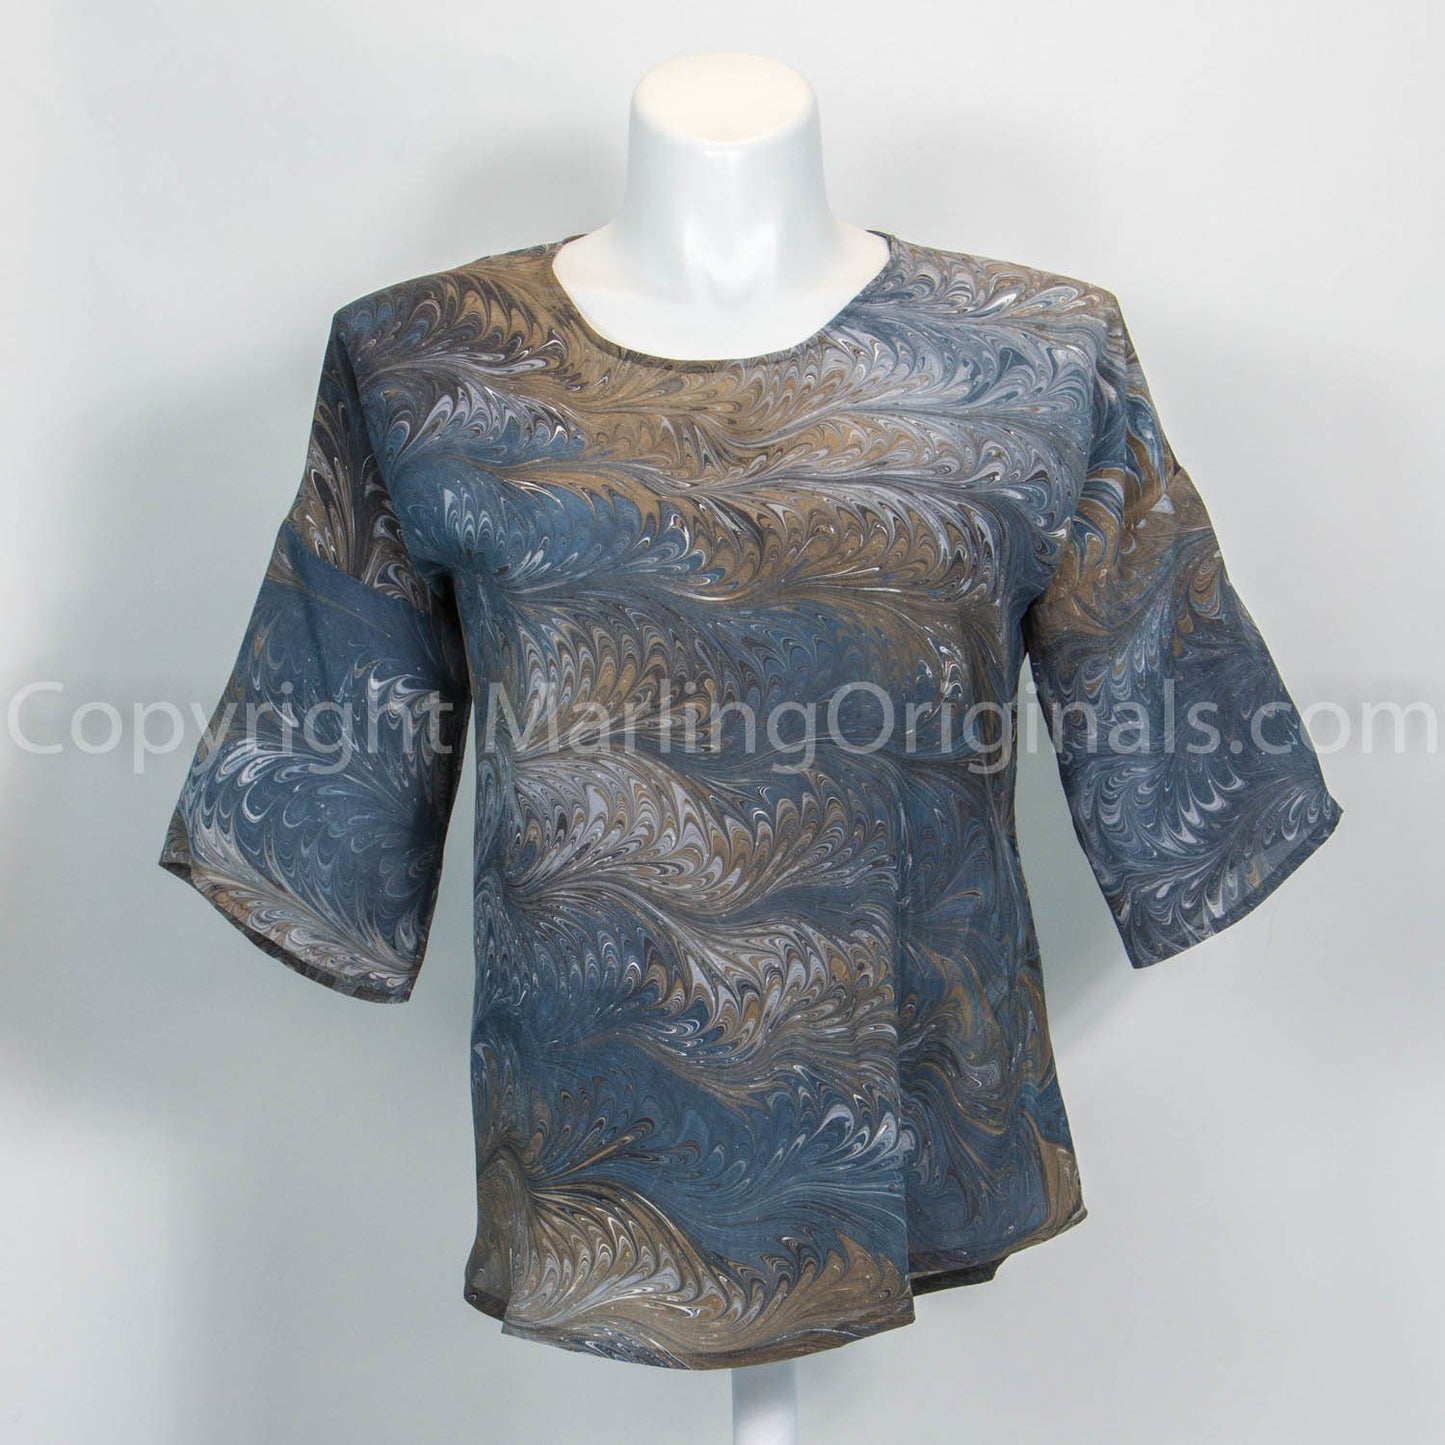 marbled grey silk top in classic style.  Beautiful feathered pattern in navy, grey, brown, black. 